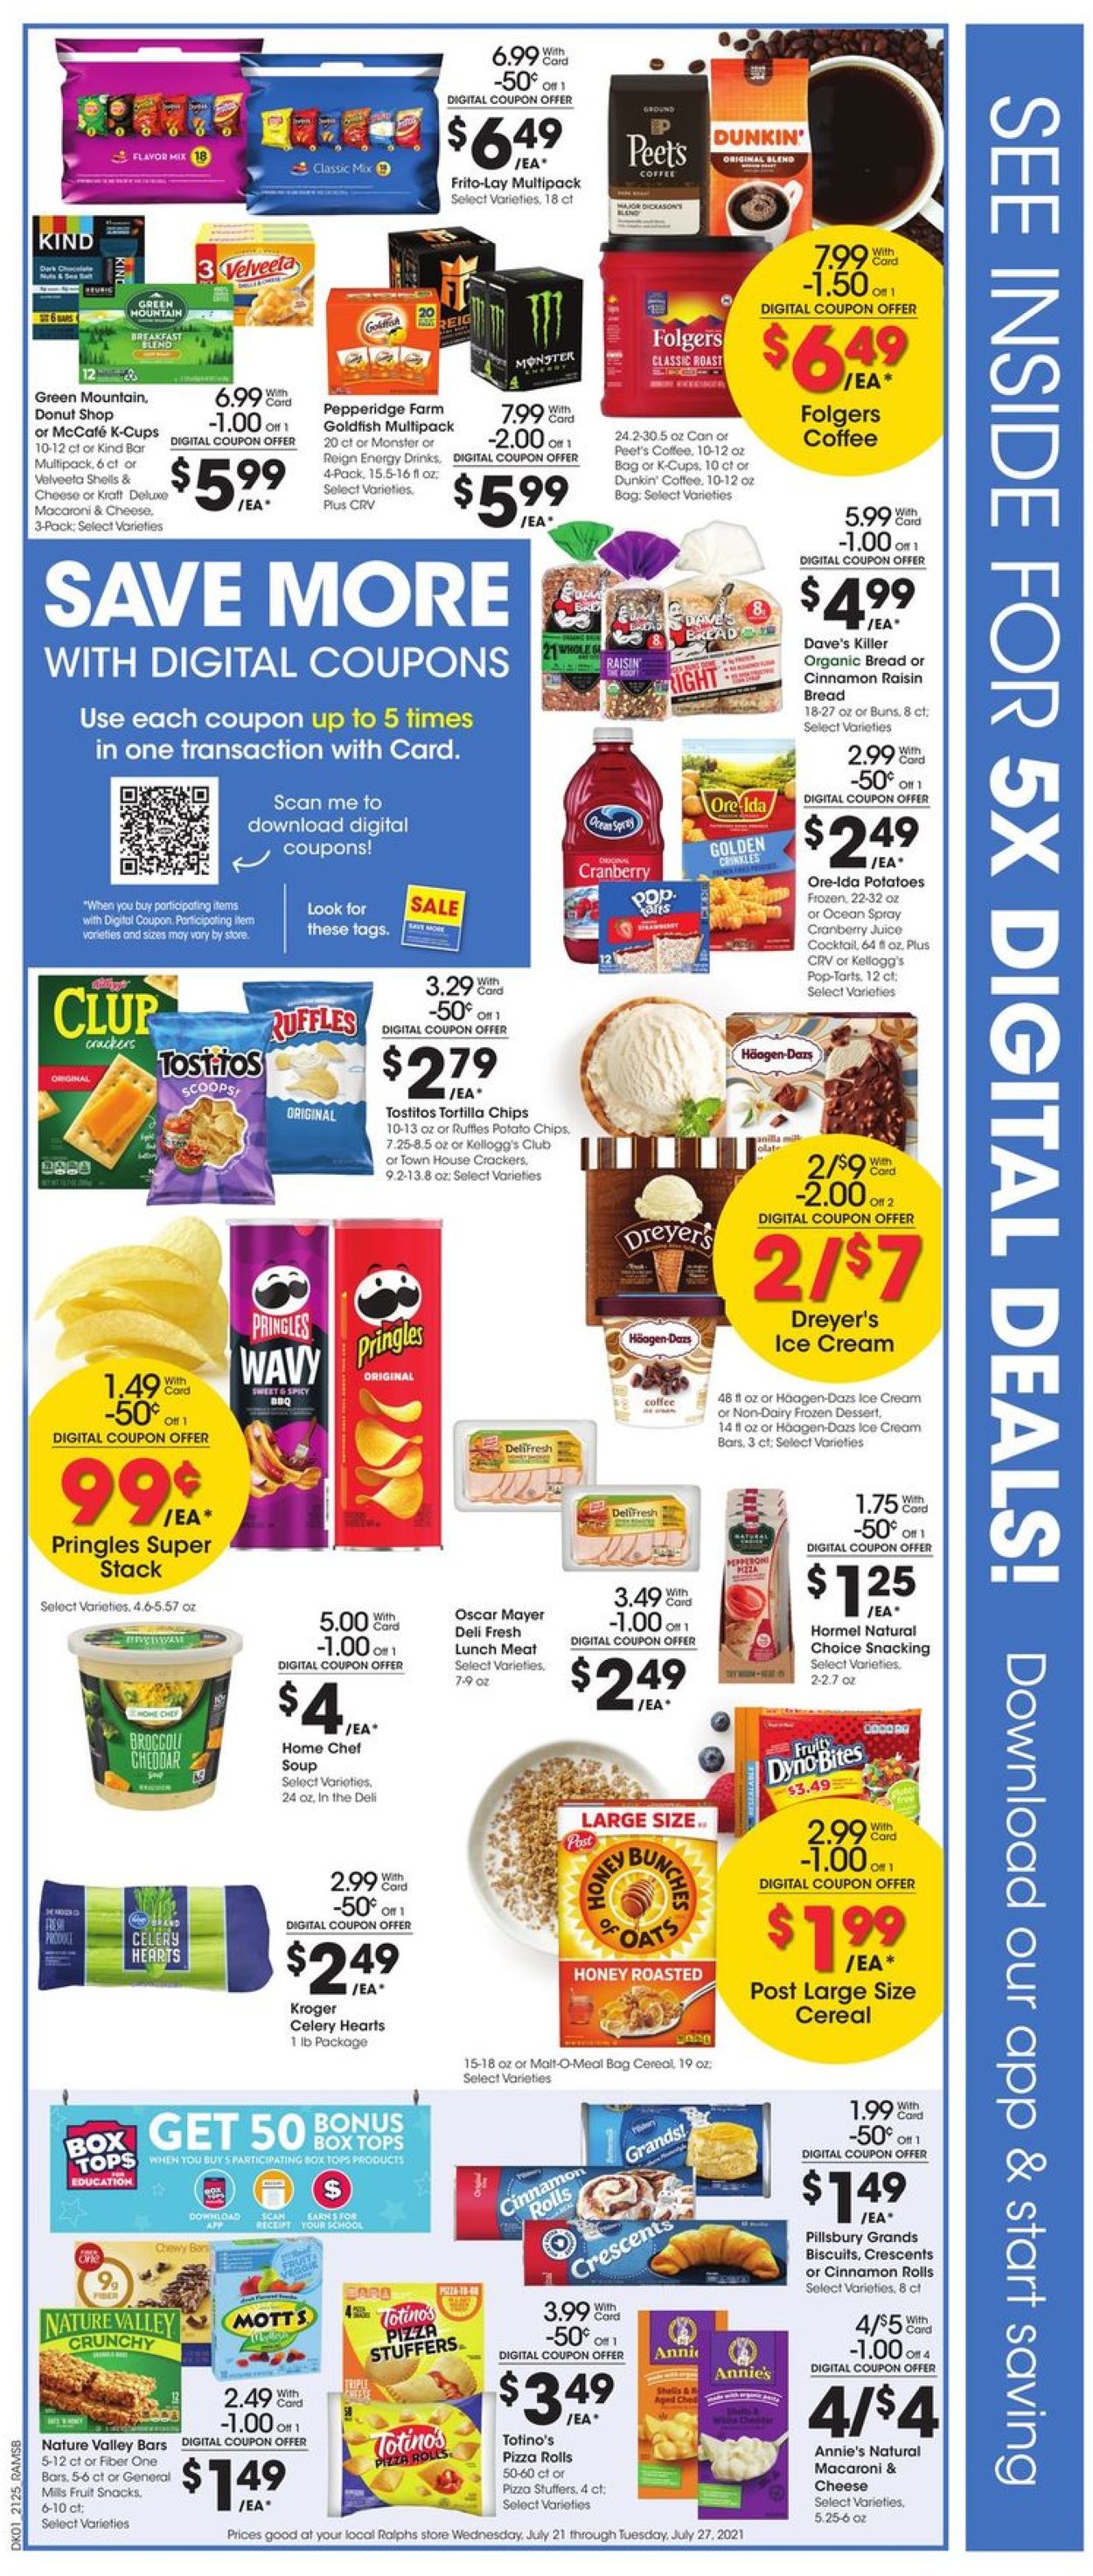 Ralphs Ad from 07/21/2021